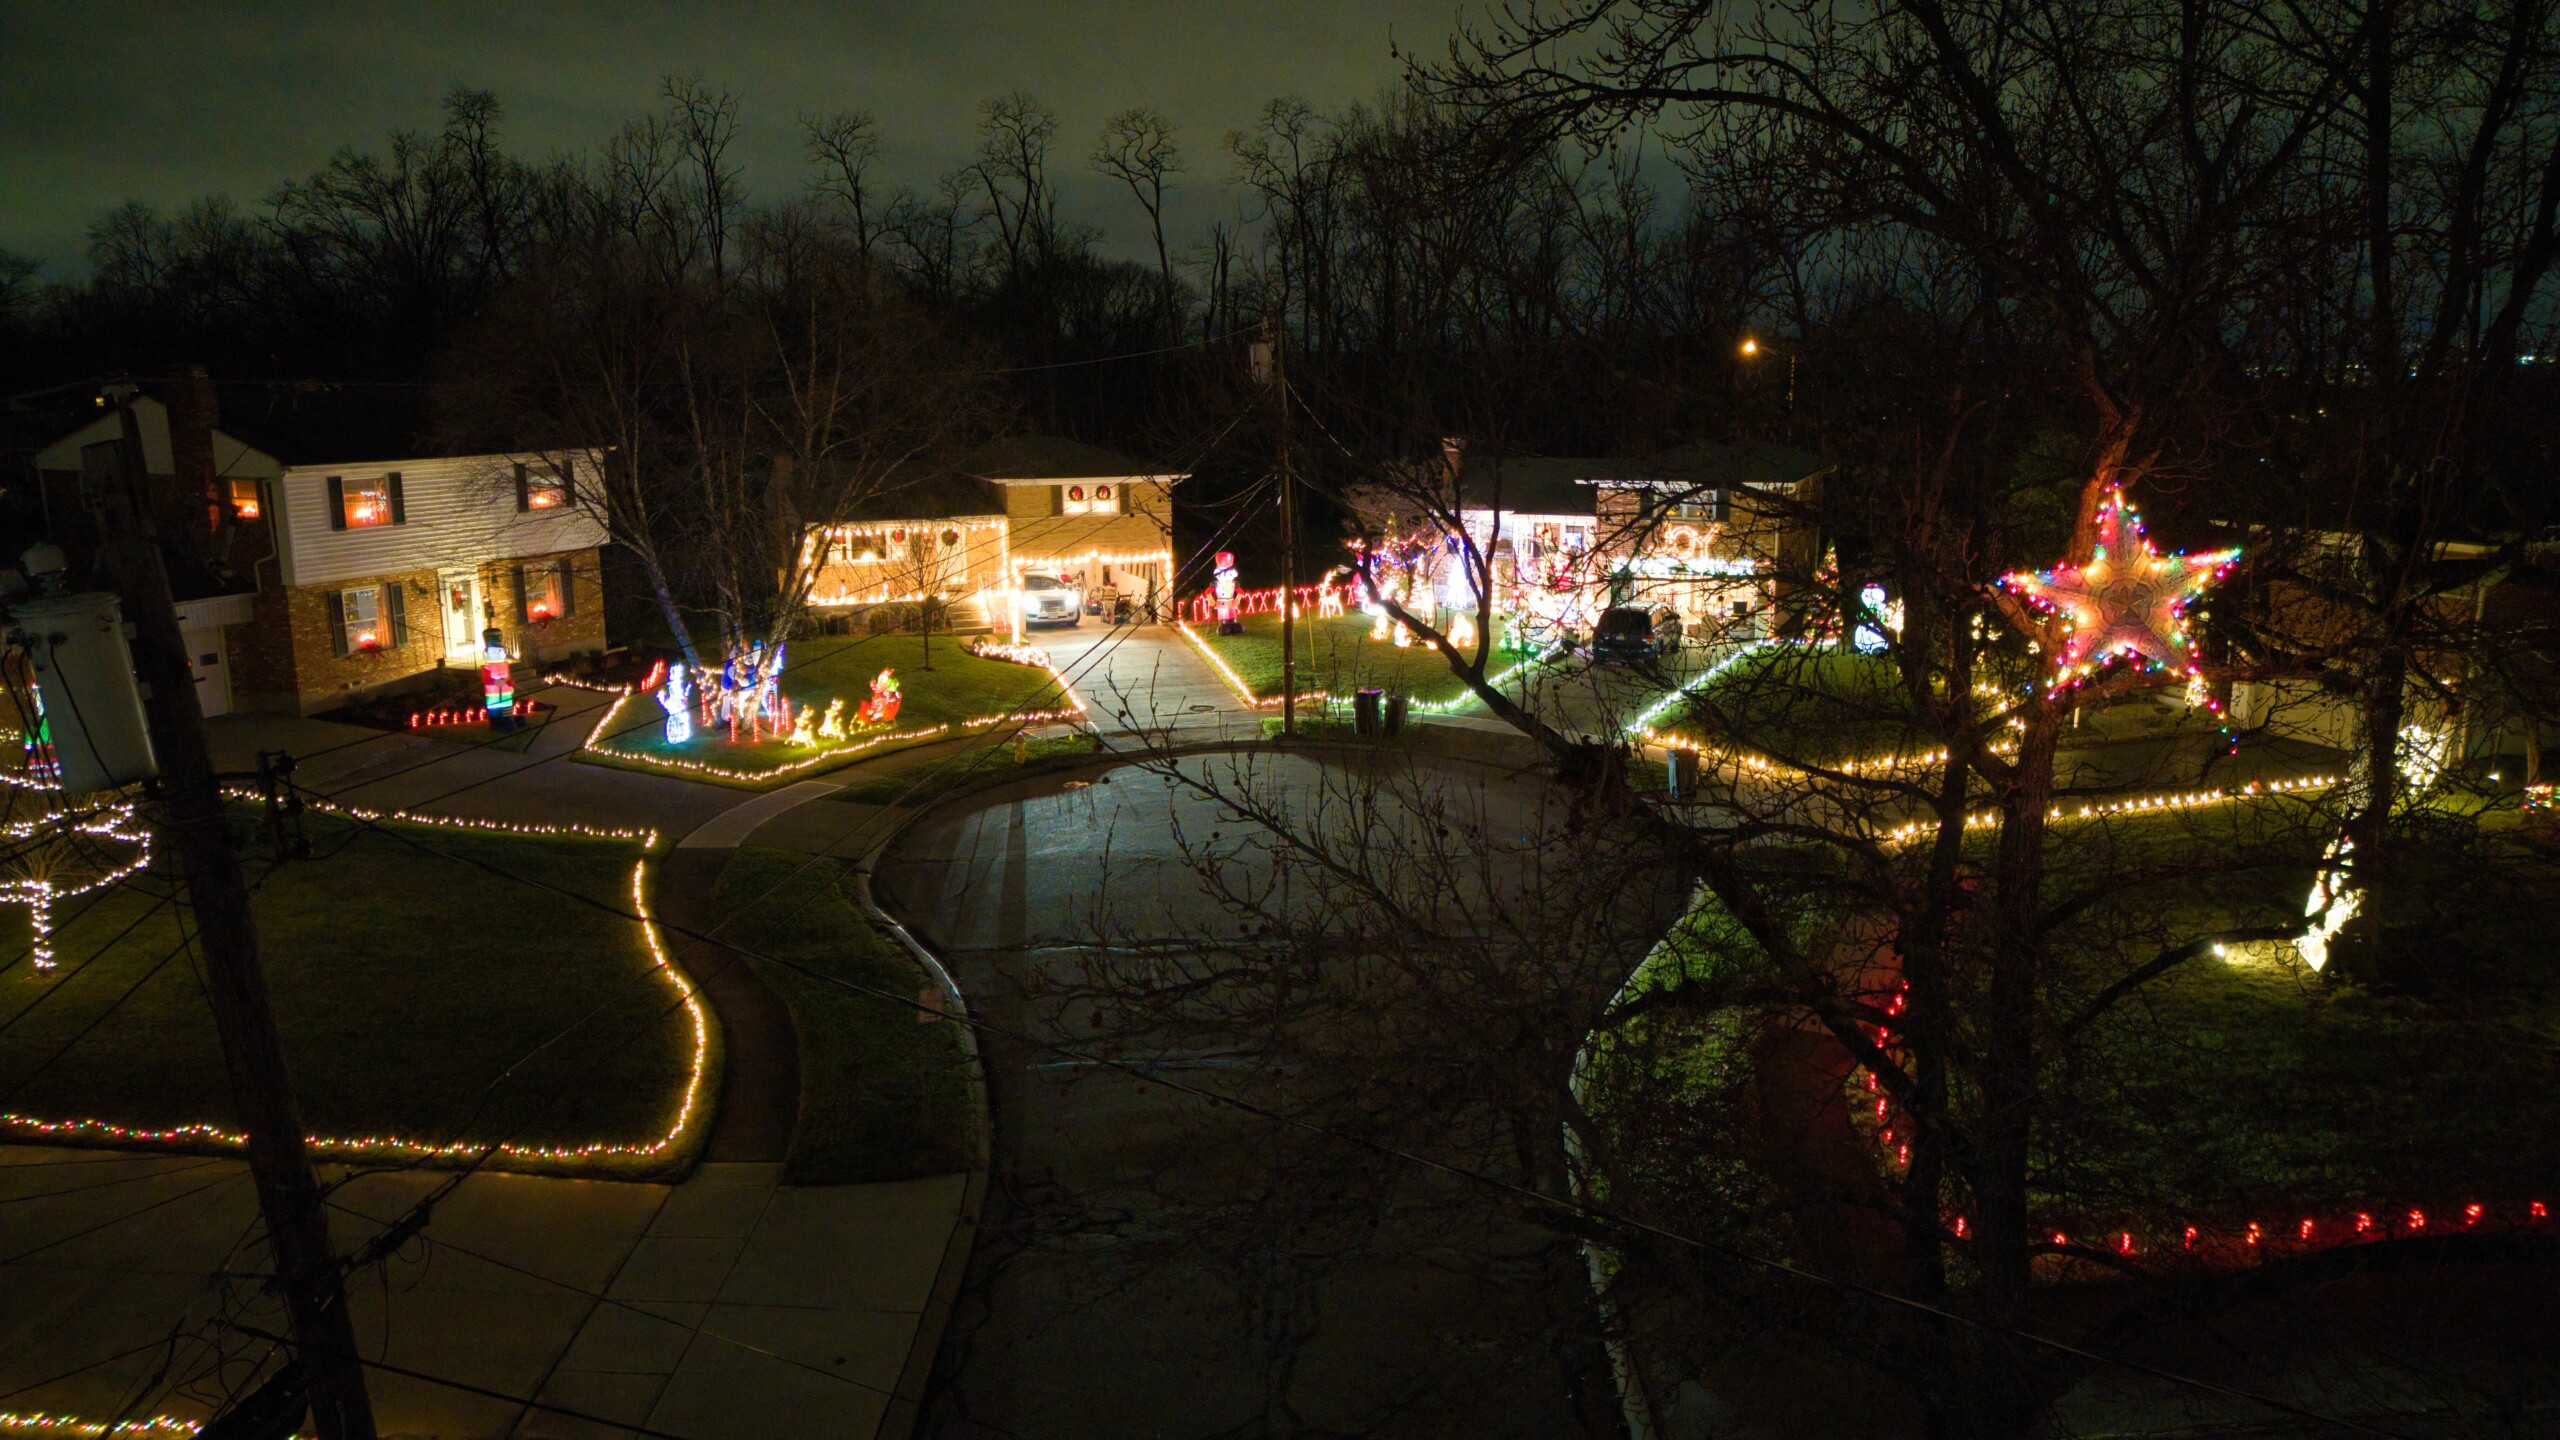 aerial view of Tramore drive cul de sac with colorful holiday lights